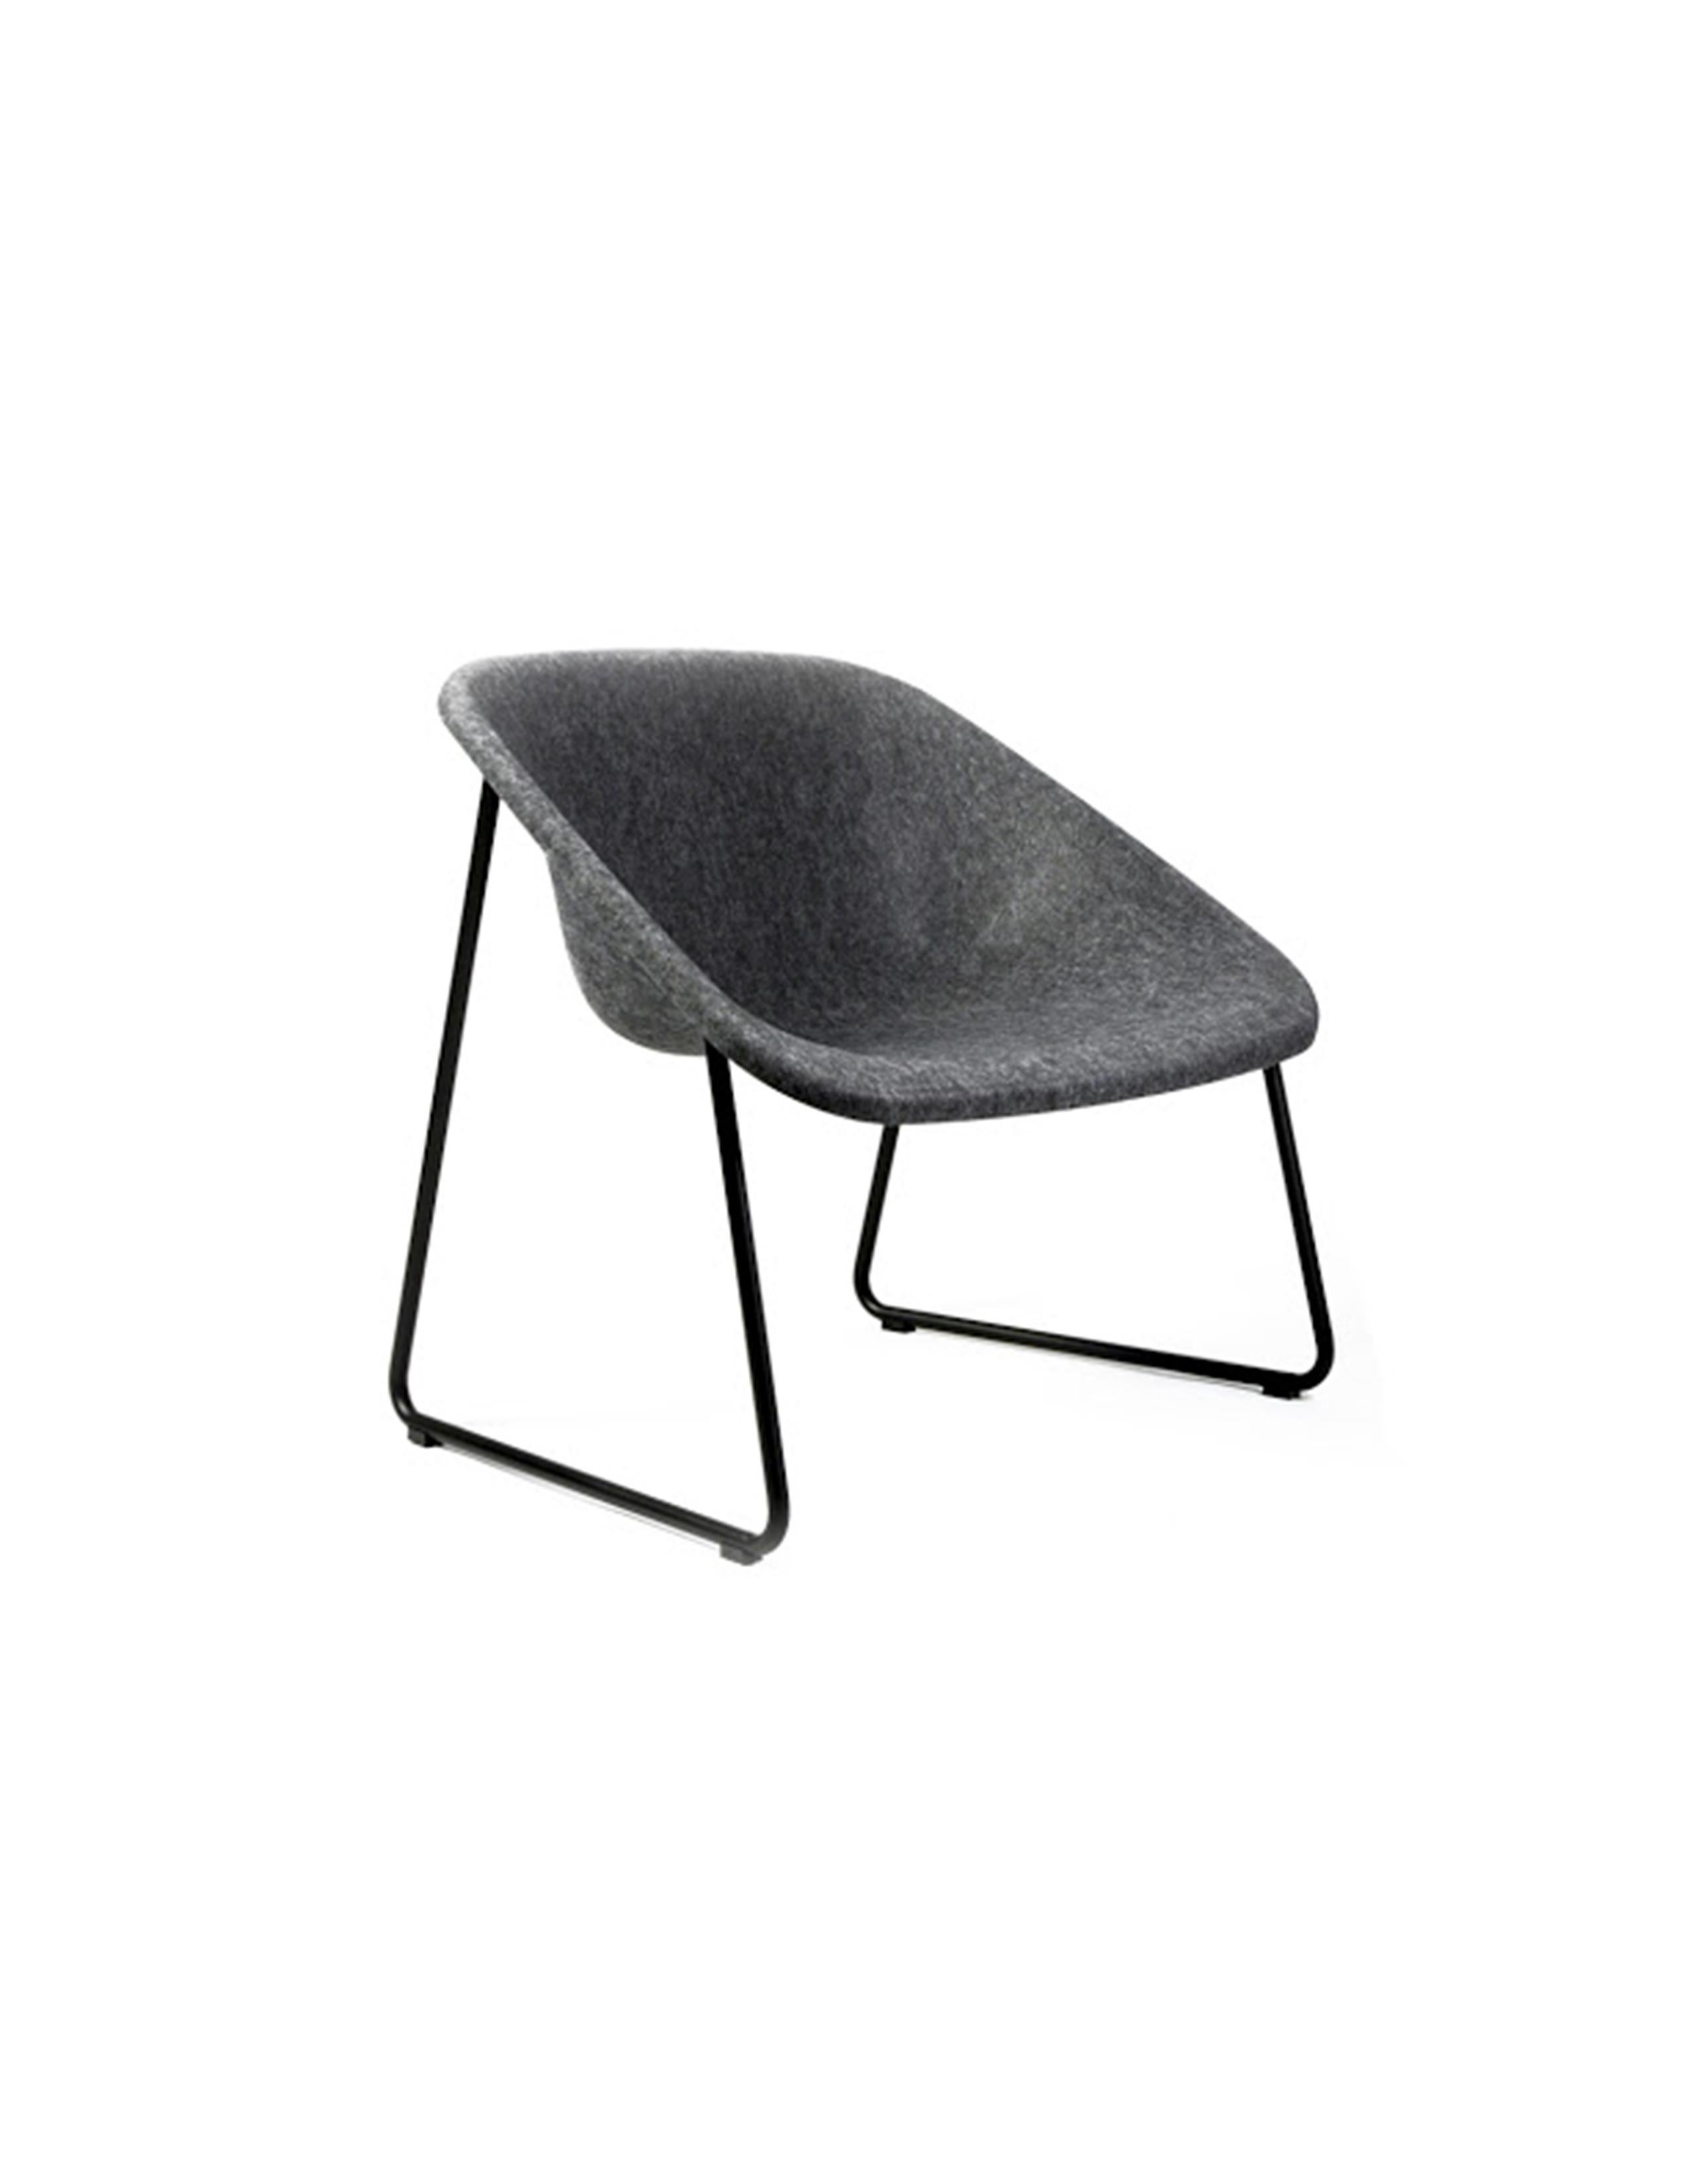 Kola Light combines the ingenious felt seat with strong steel leg frame construction. This combination of materials allows the chair to offer superb comfort, light weight and durability to lobbies, lounges and waiting areas.

Kola is a family of